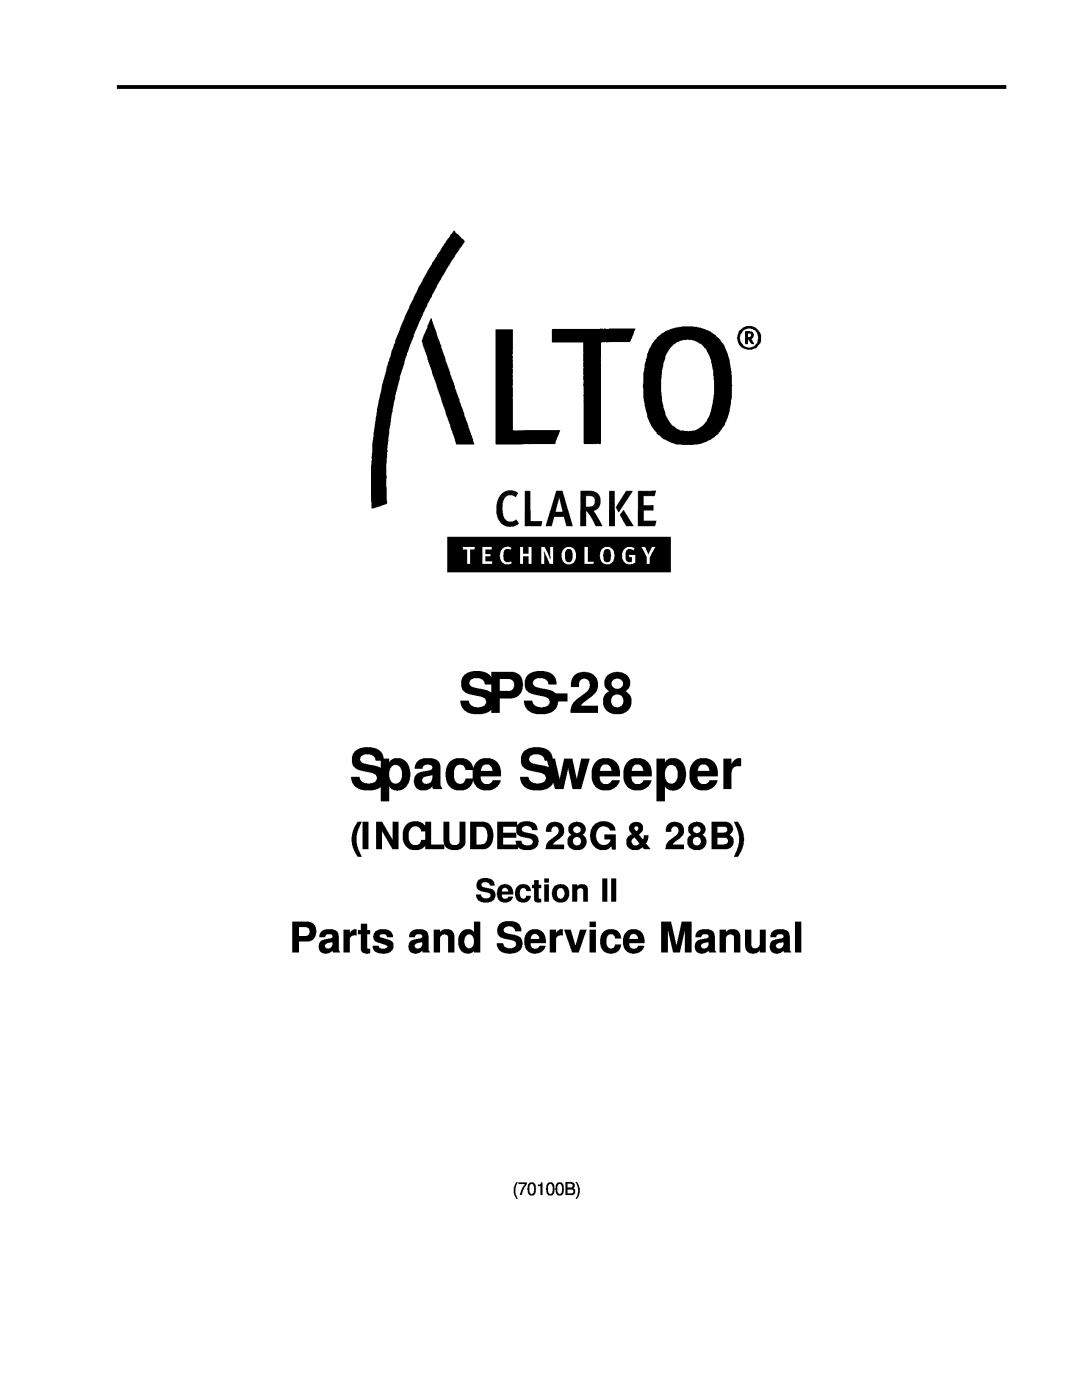 Nilfisk-ALTO SPS-28 E manual INCLUDES 28G & 28B, SPS-28 Space Sweeper, Section 